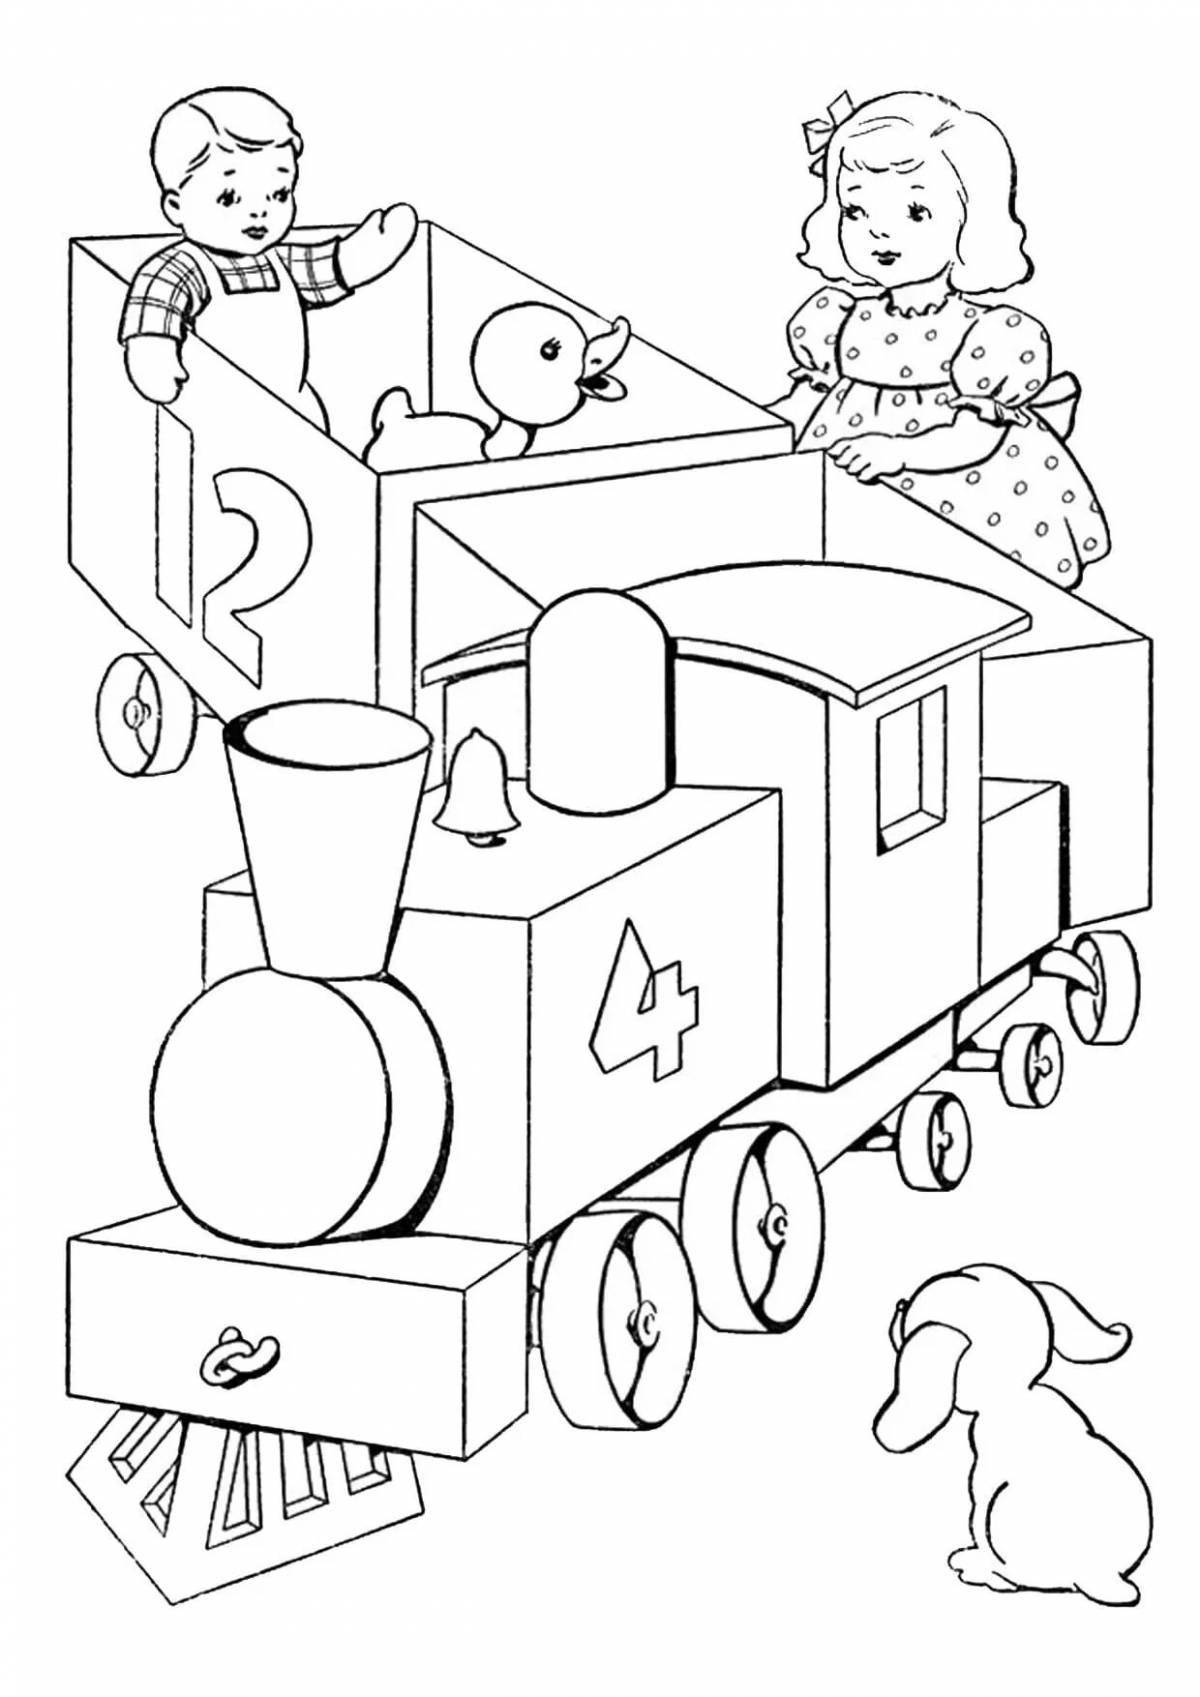 Sweet train coloring for kids